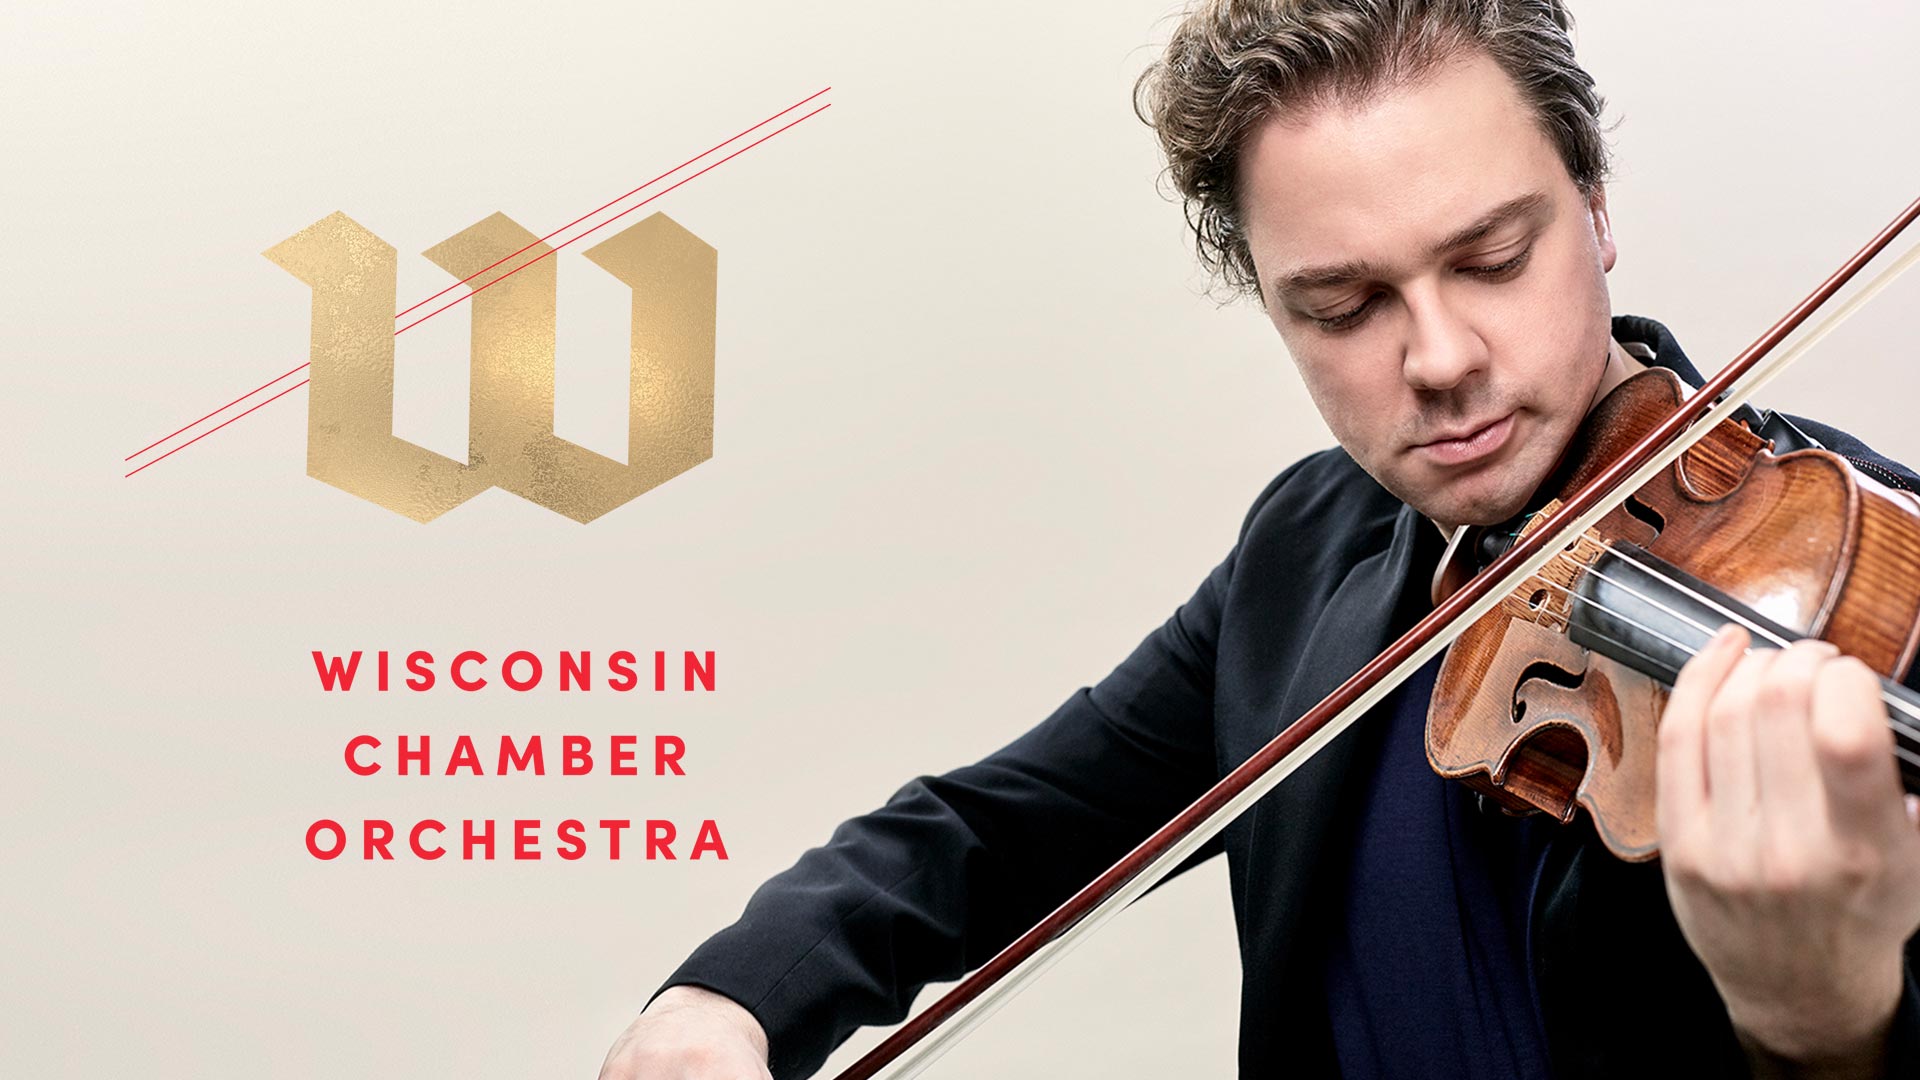 Banner text reads: Wisconsin Chamber Orchestra. A white man with short brown hair playing a violin.